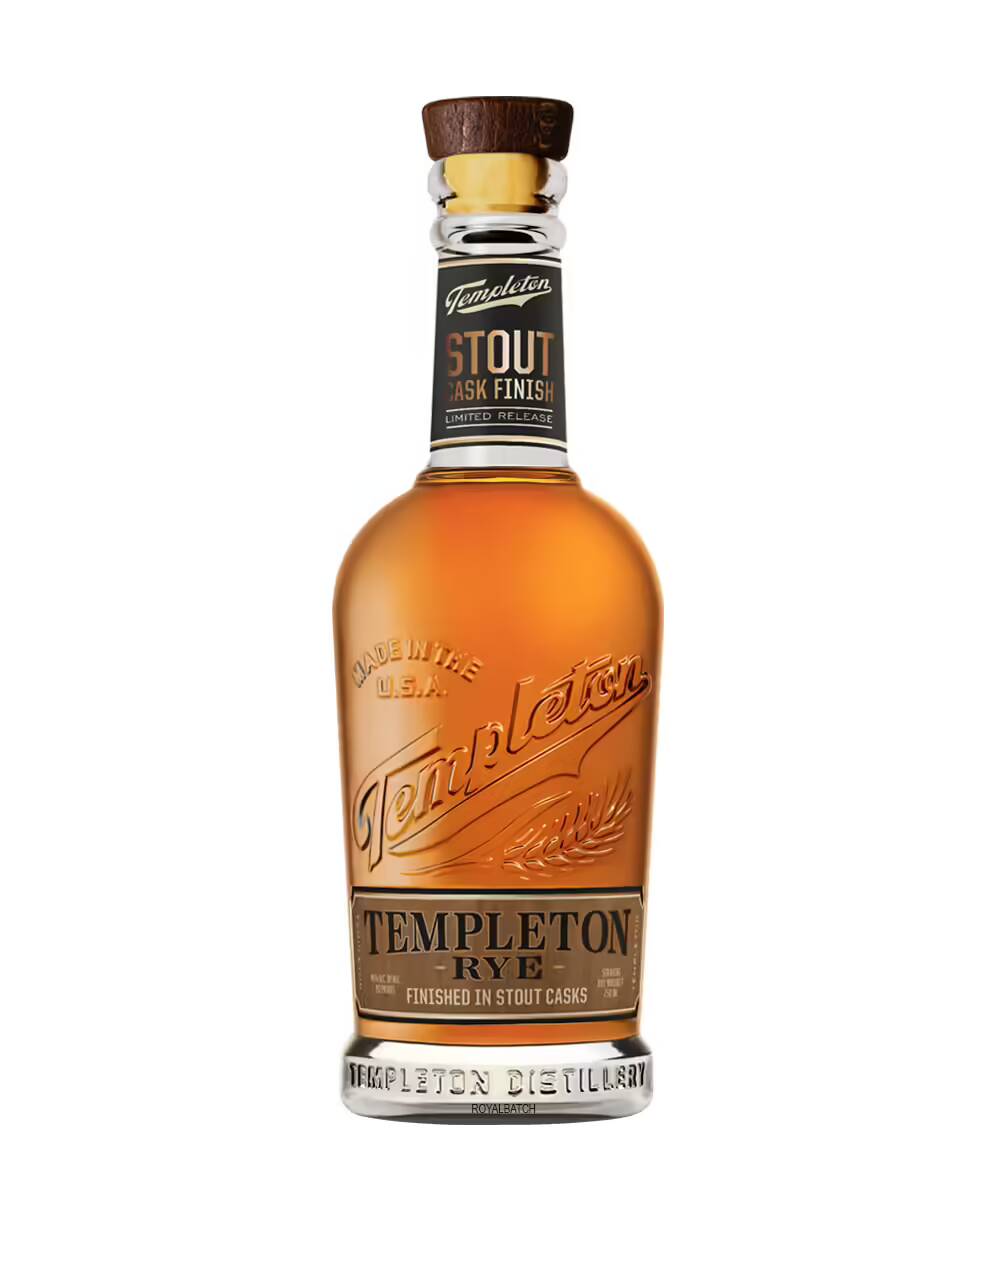 Templeton Stout Cask Finish Limited Release Rye Whiskey